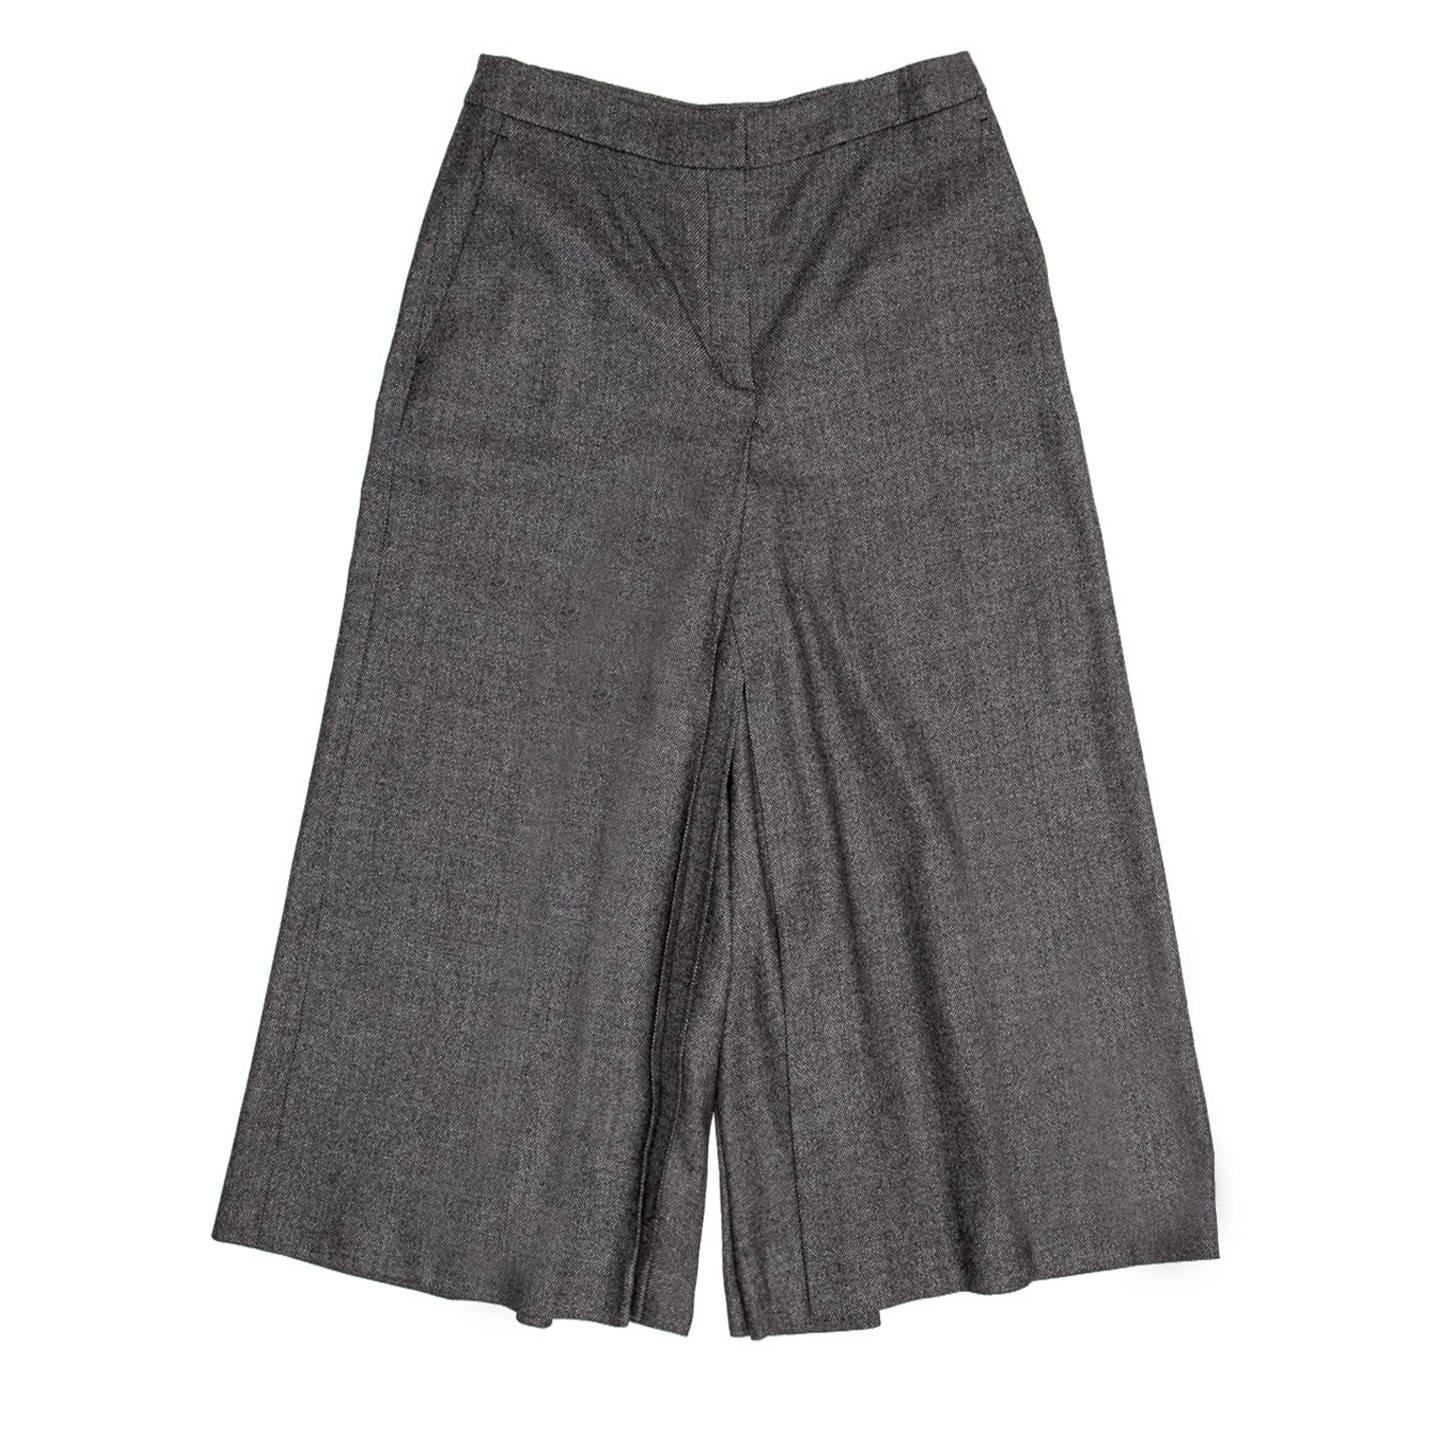 Grey virgin wool and cashmere blend tweed gaucho pants, high waisted and calf length. The inner legs are pleated and create the illusion of a skirt with a beautiful movement while walking. The front has minimal slash pockets and a back only one